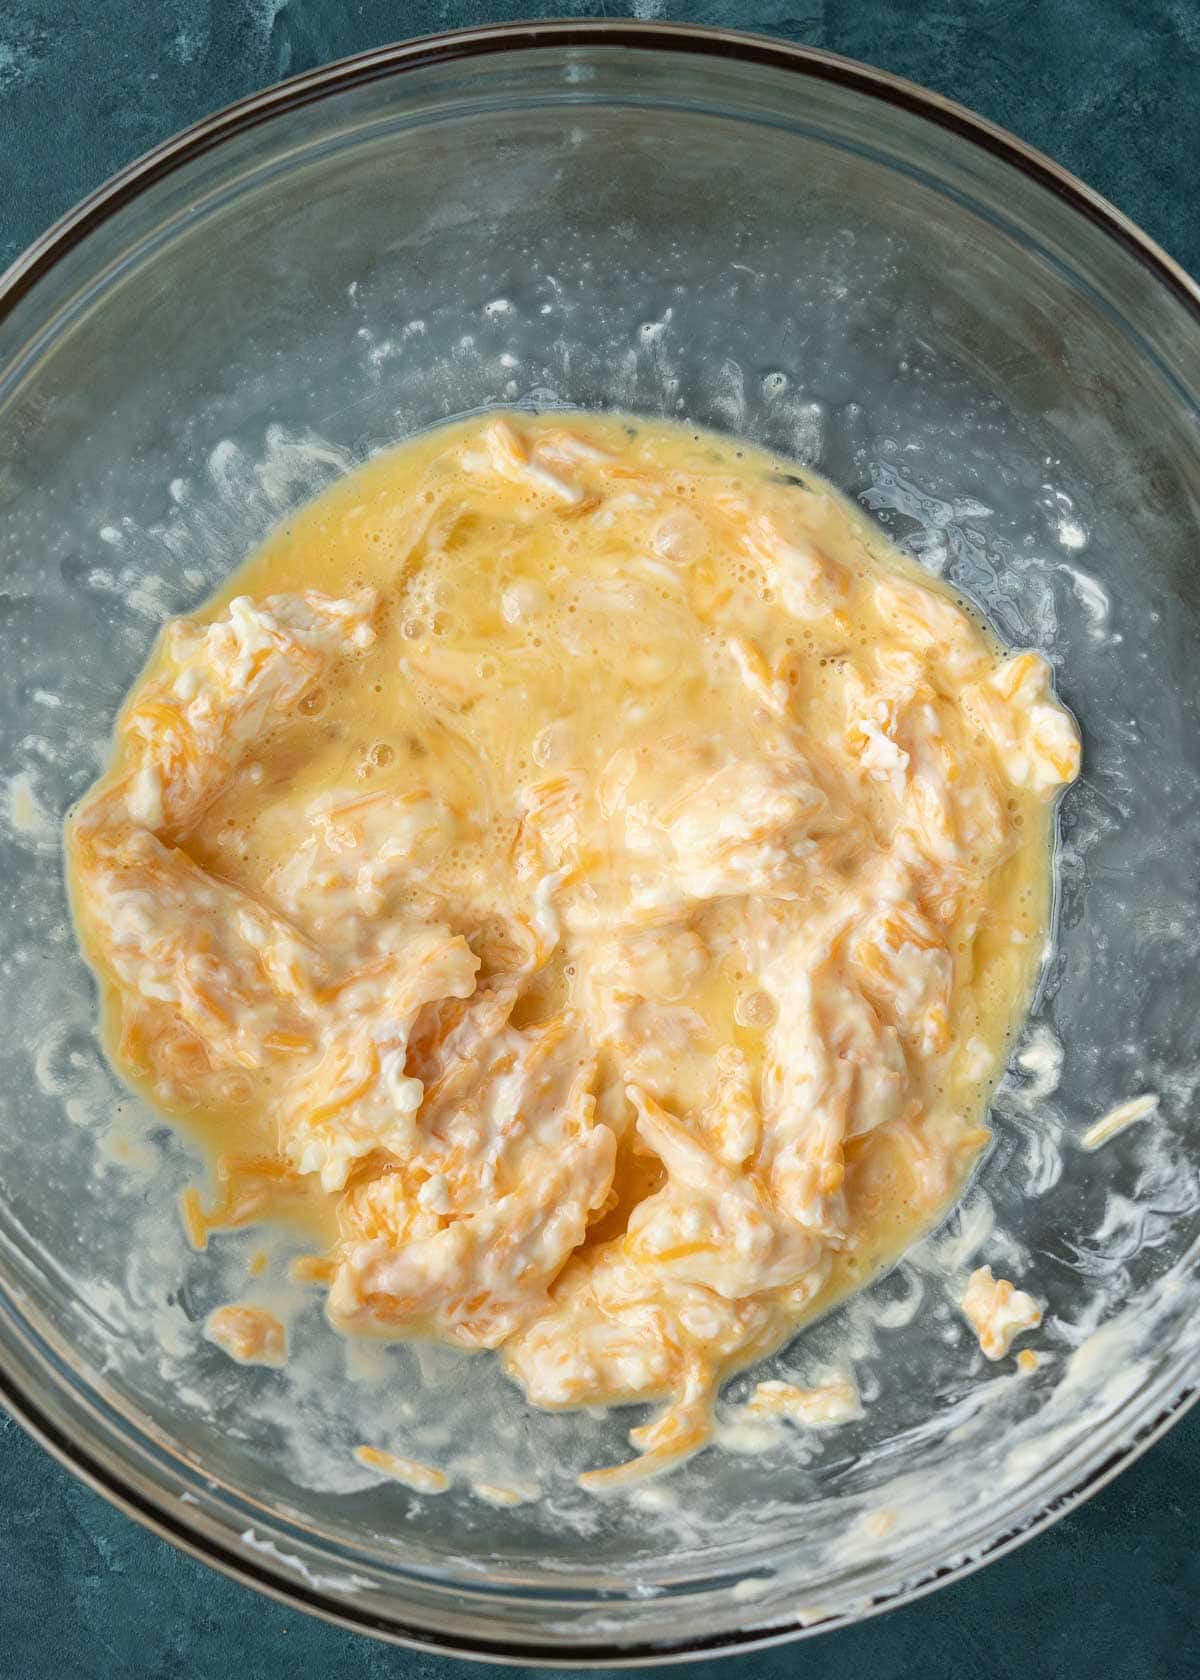 cream cheese, shredded cheese, heavy cream, and melted butter in a glass bowl